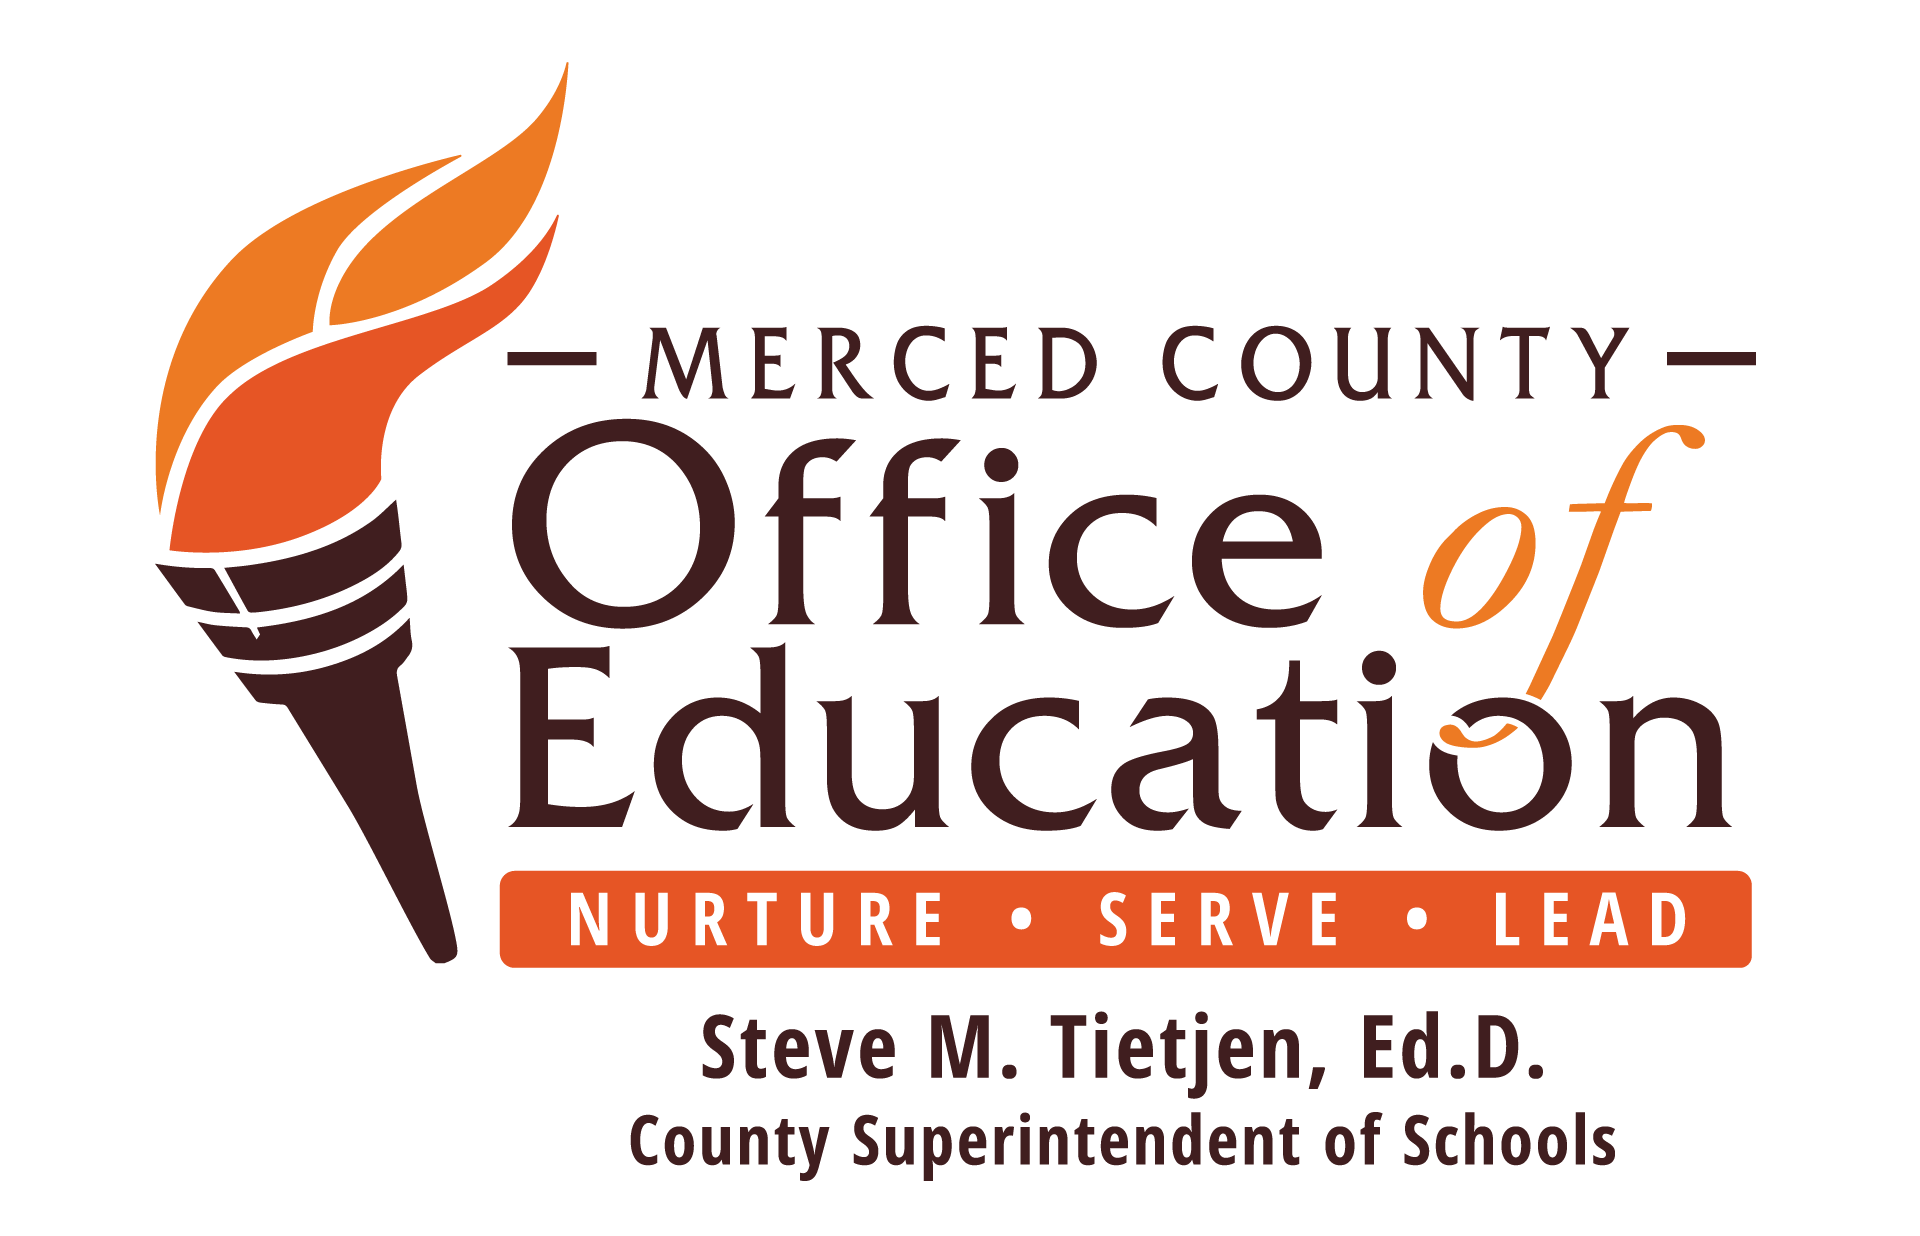 Merced County Office of Education